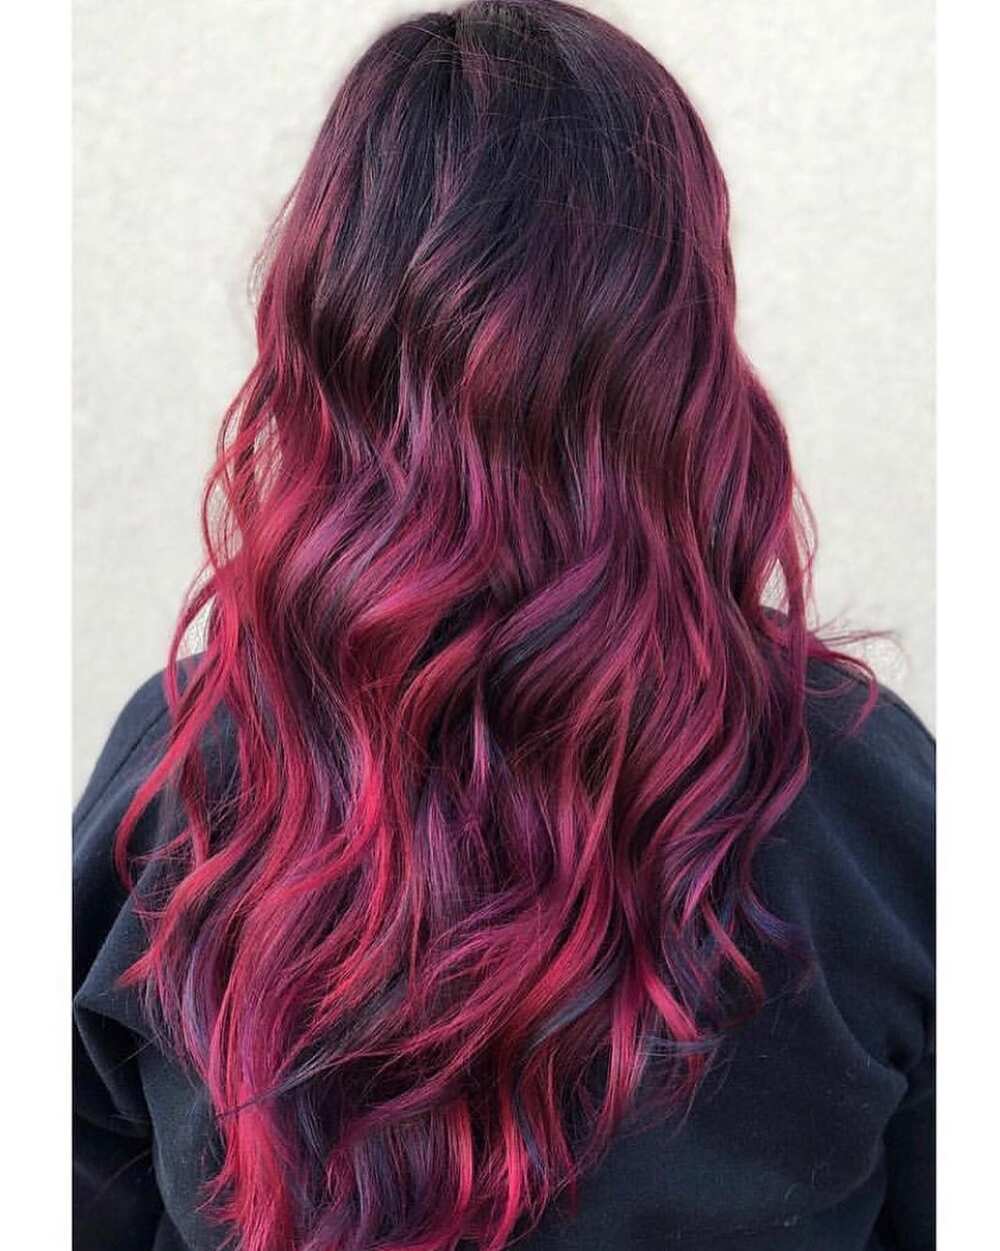 30 trendy pink hair ideas to try in 2019 